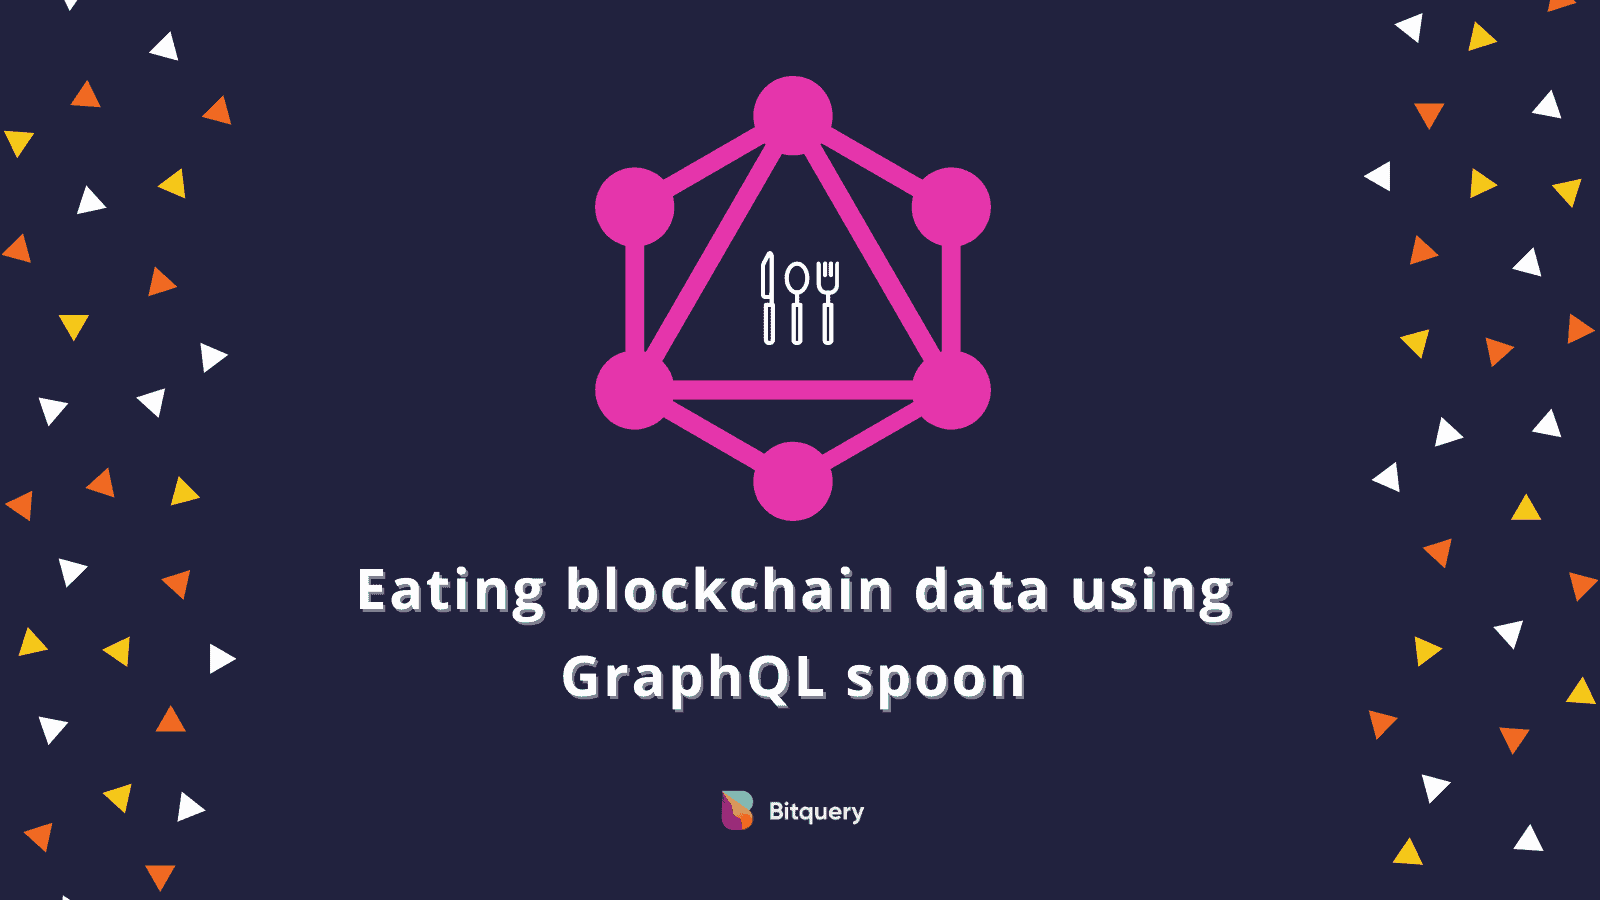 Cover Image for Eating blockchain data using GraphQL spoon